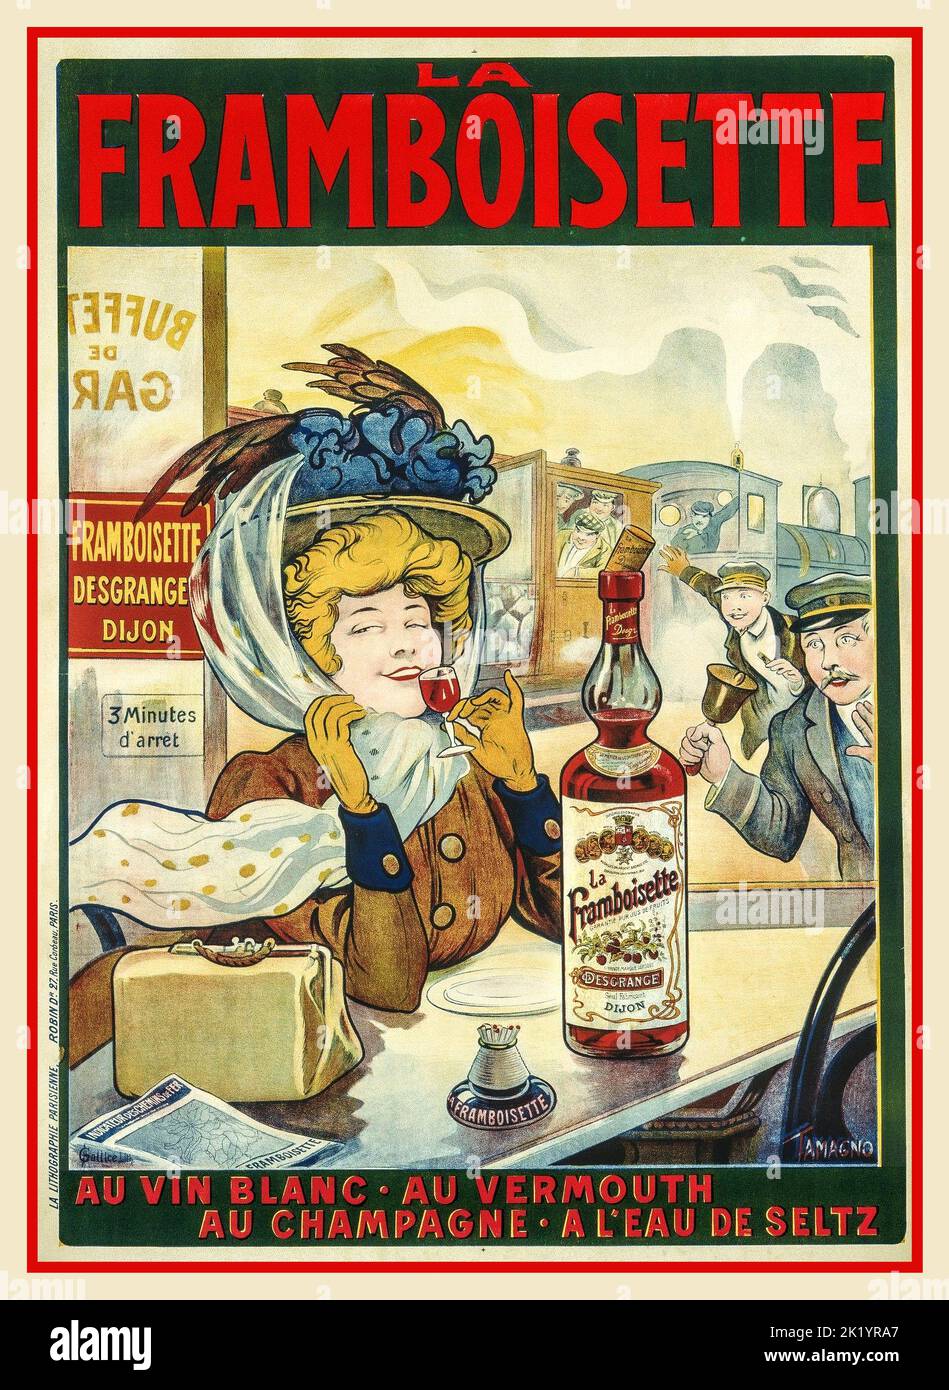 Vintage 1900s French Drinks Poster La Framboisette a rasberry liqueur from Dijon that is delaying a train as a French lady passenger takes time to savour her drink. Au Vin Blanc,Au Vermouth, Au Champagne A L'Eau de Seltz Stock Photo